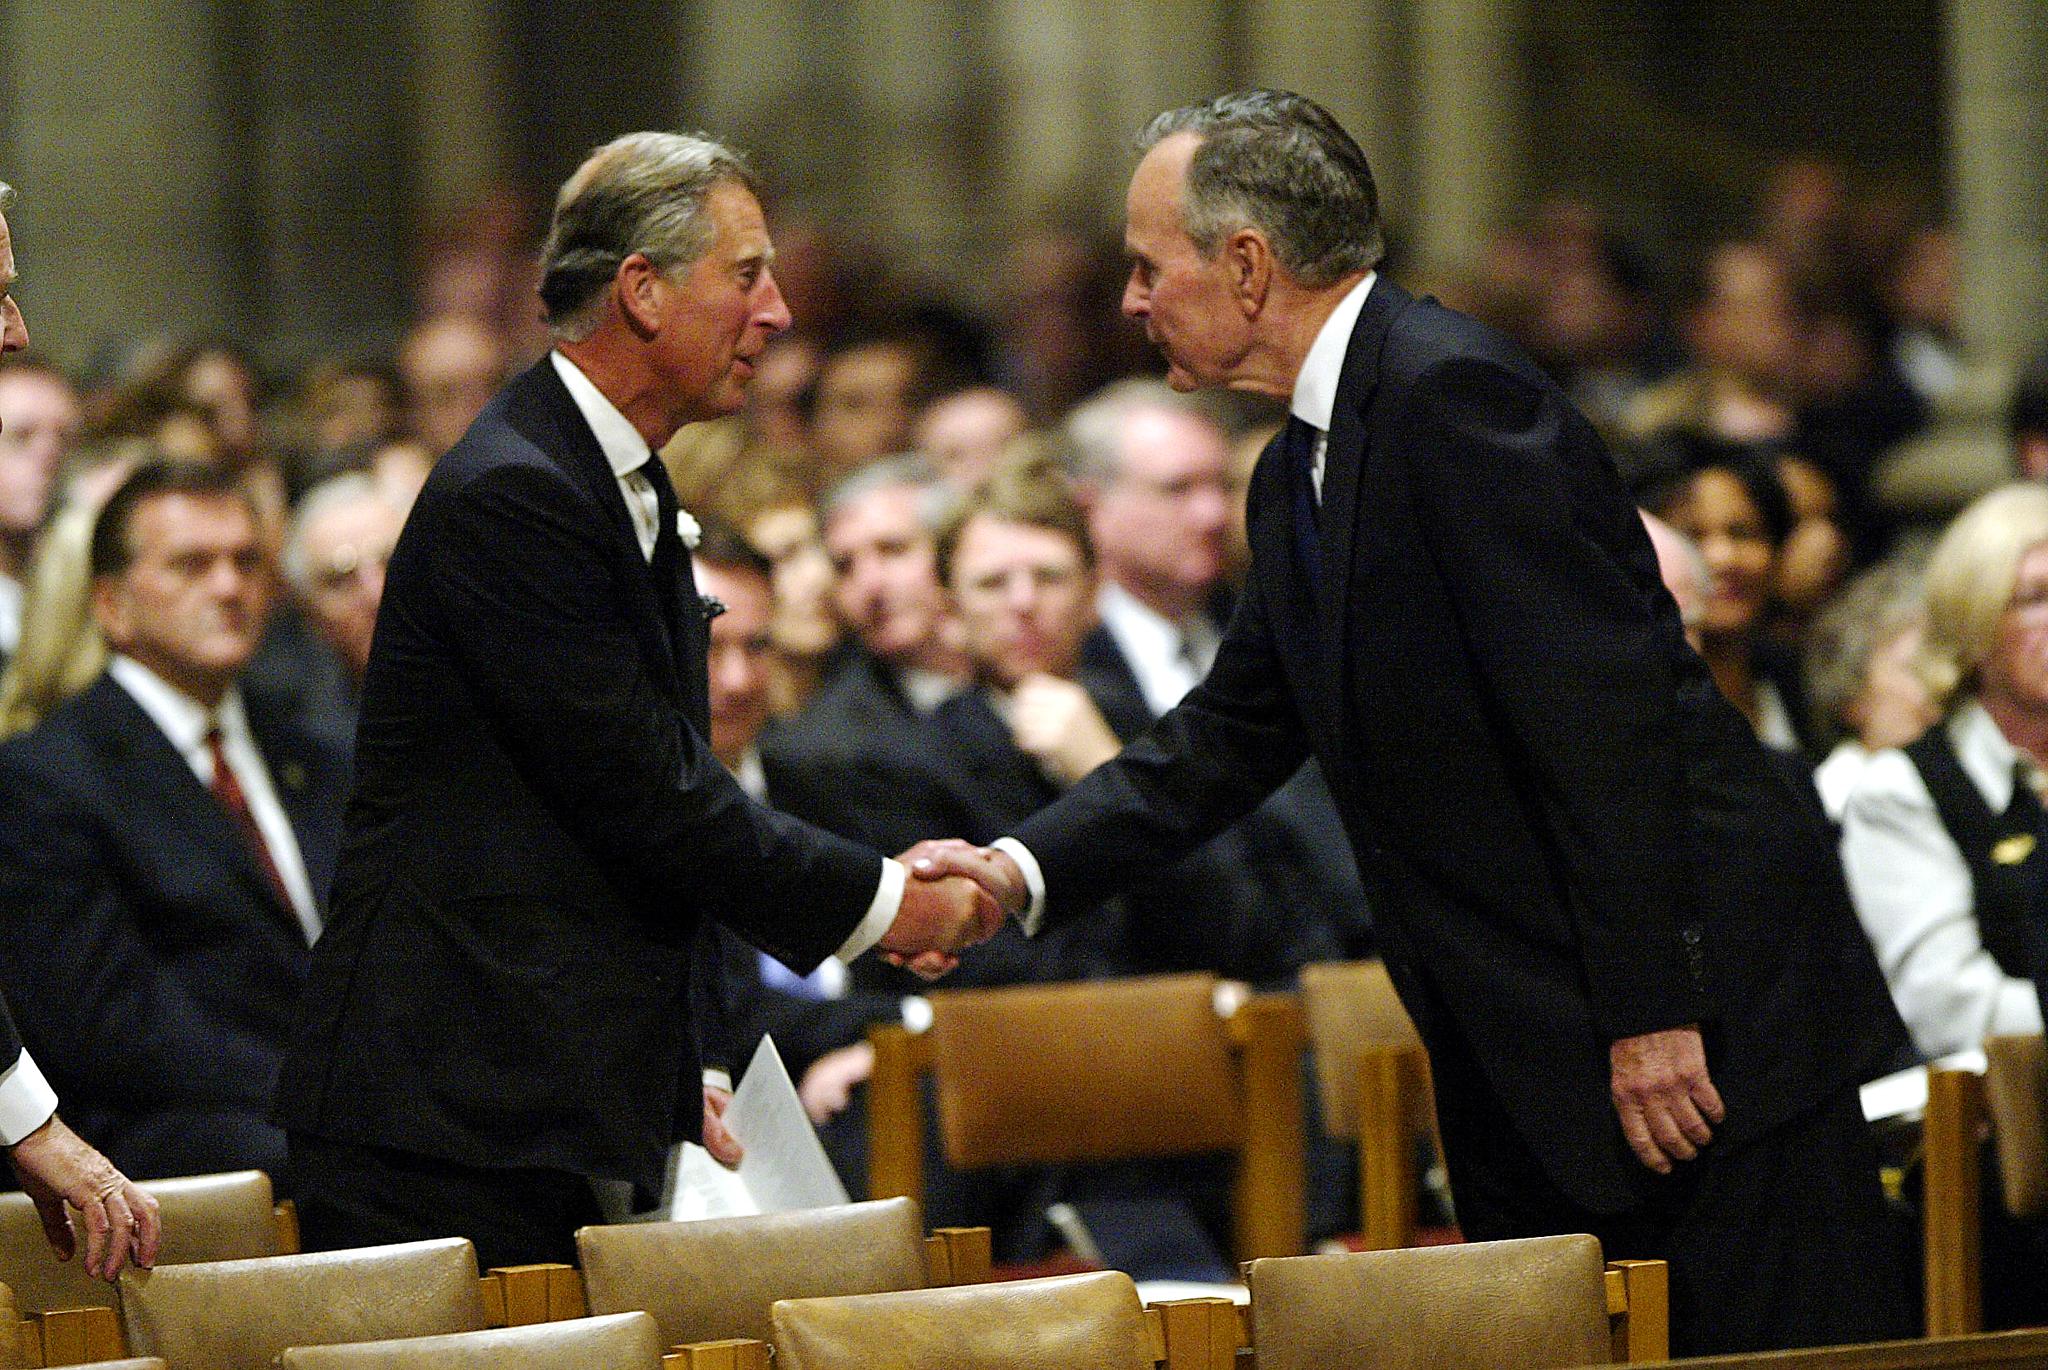 Former US president George HW Bush greets Prince Charles at the funeral of Ronald Reagan in Washington, DC in June 2004